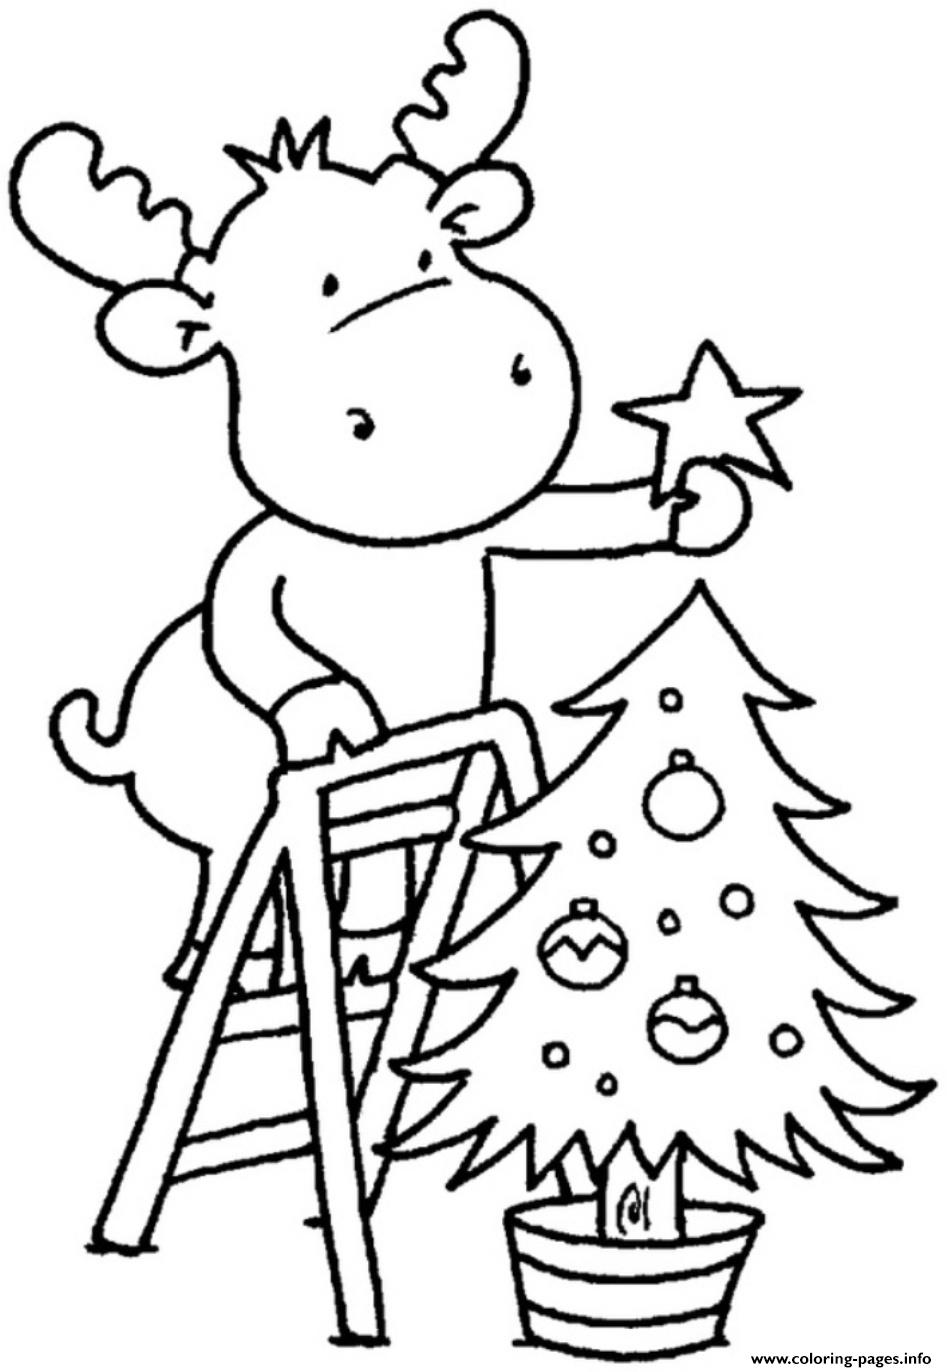 Coloring Pages Christmas Tree For Childrened79 coloring